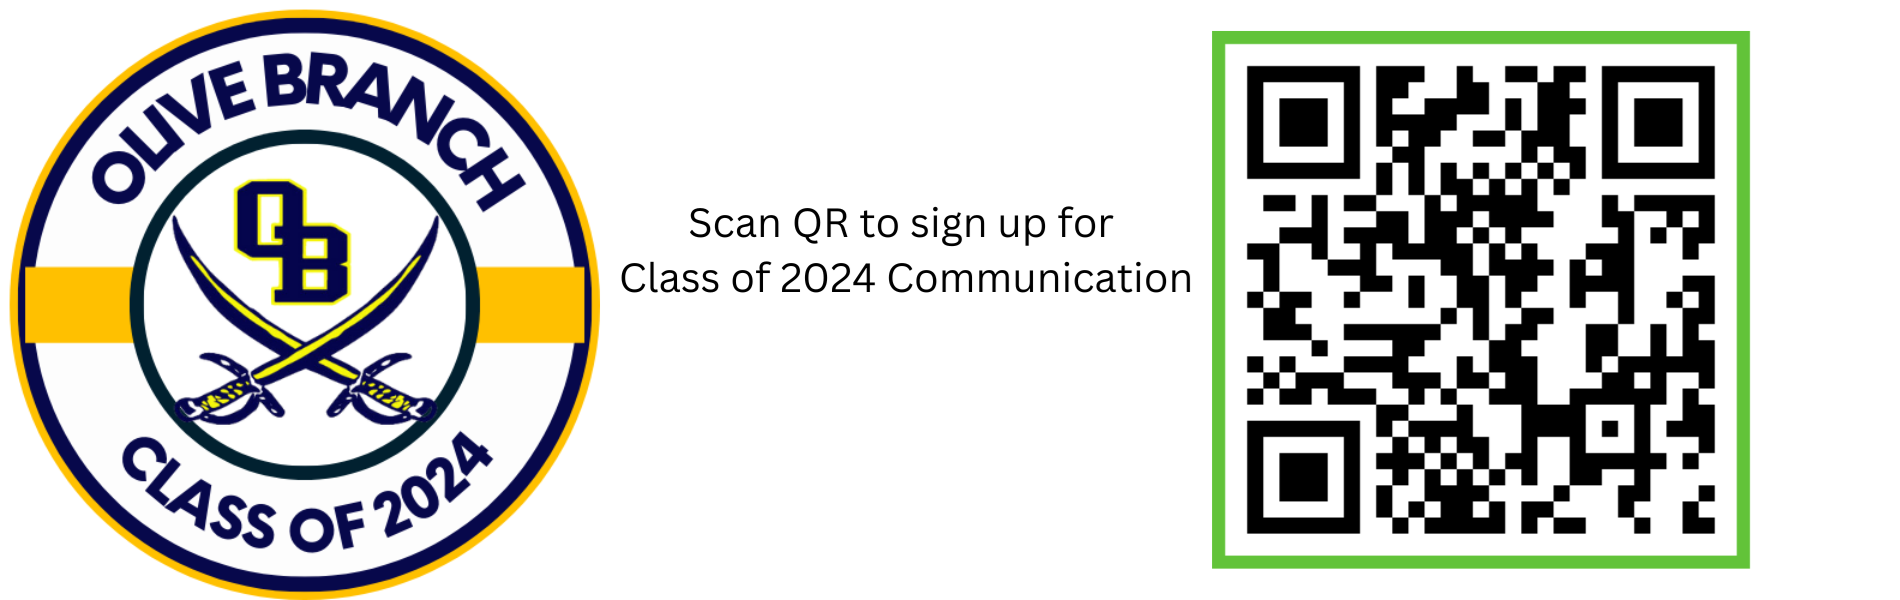 Class of 2024 Communication Tool (Band App_